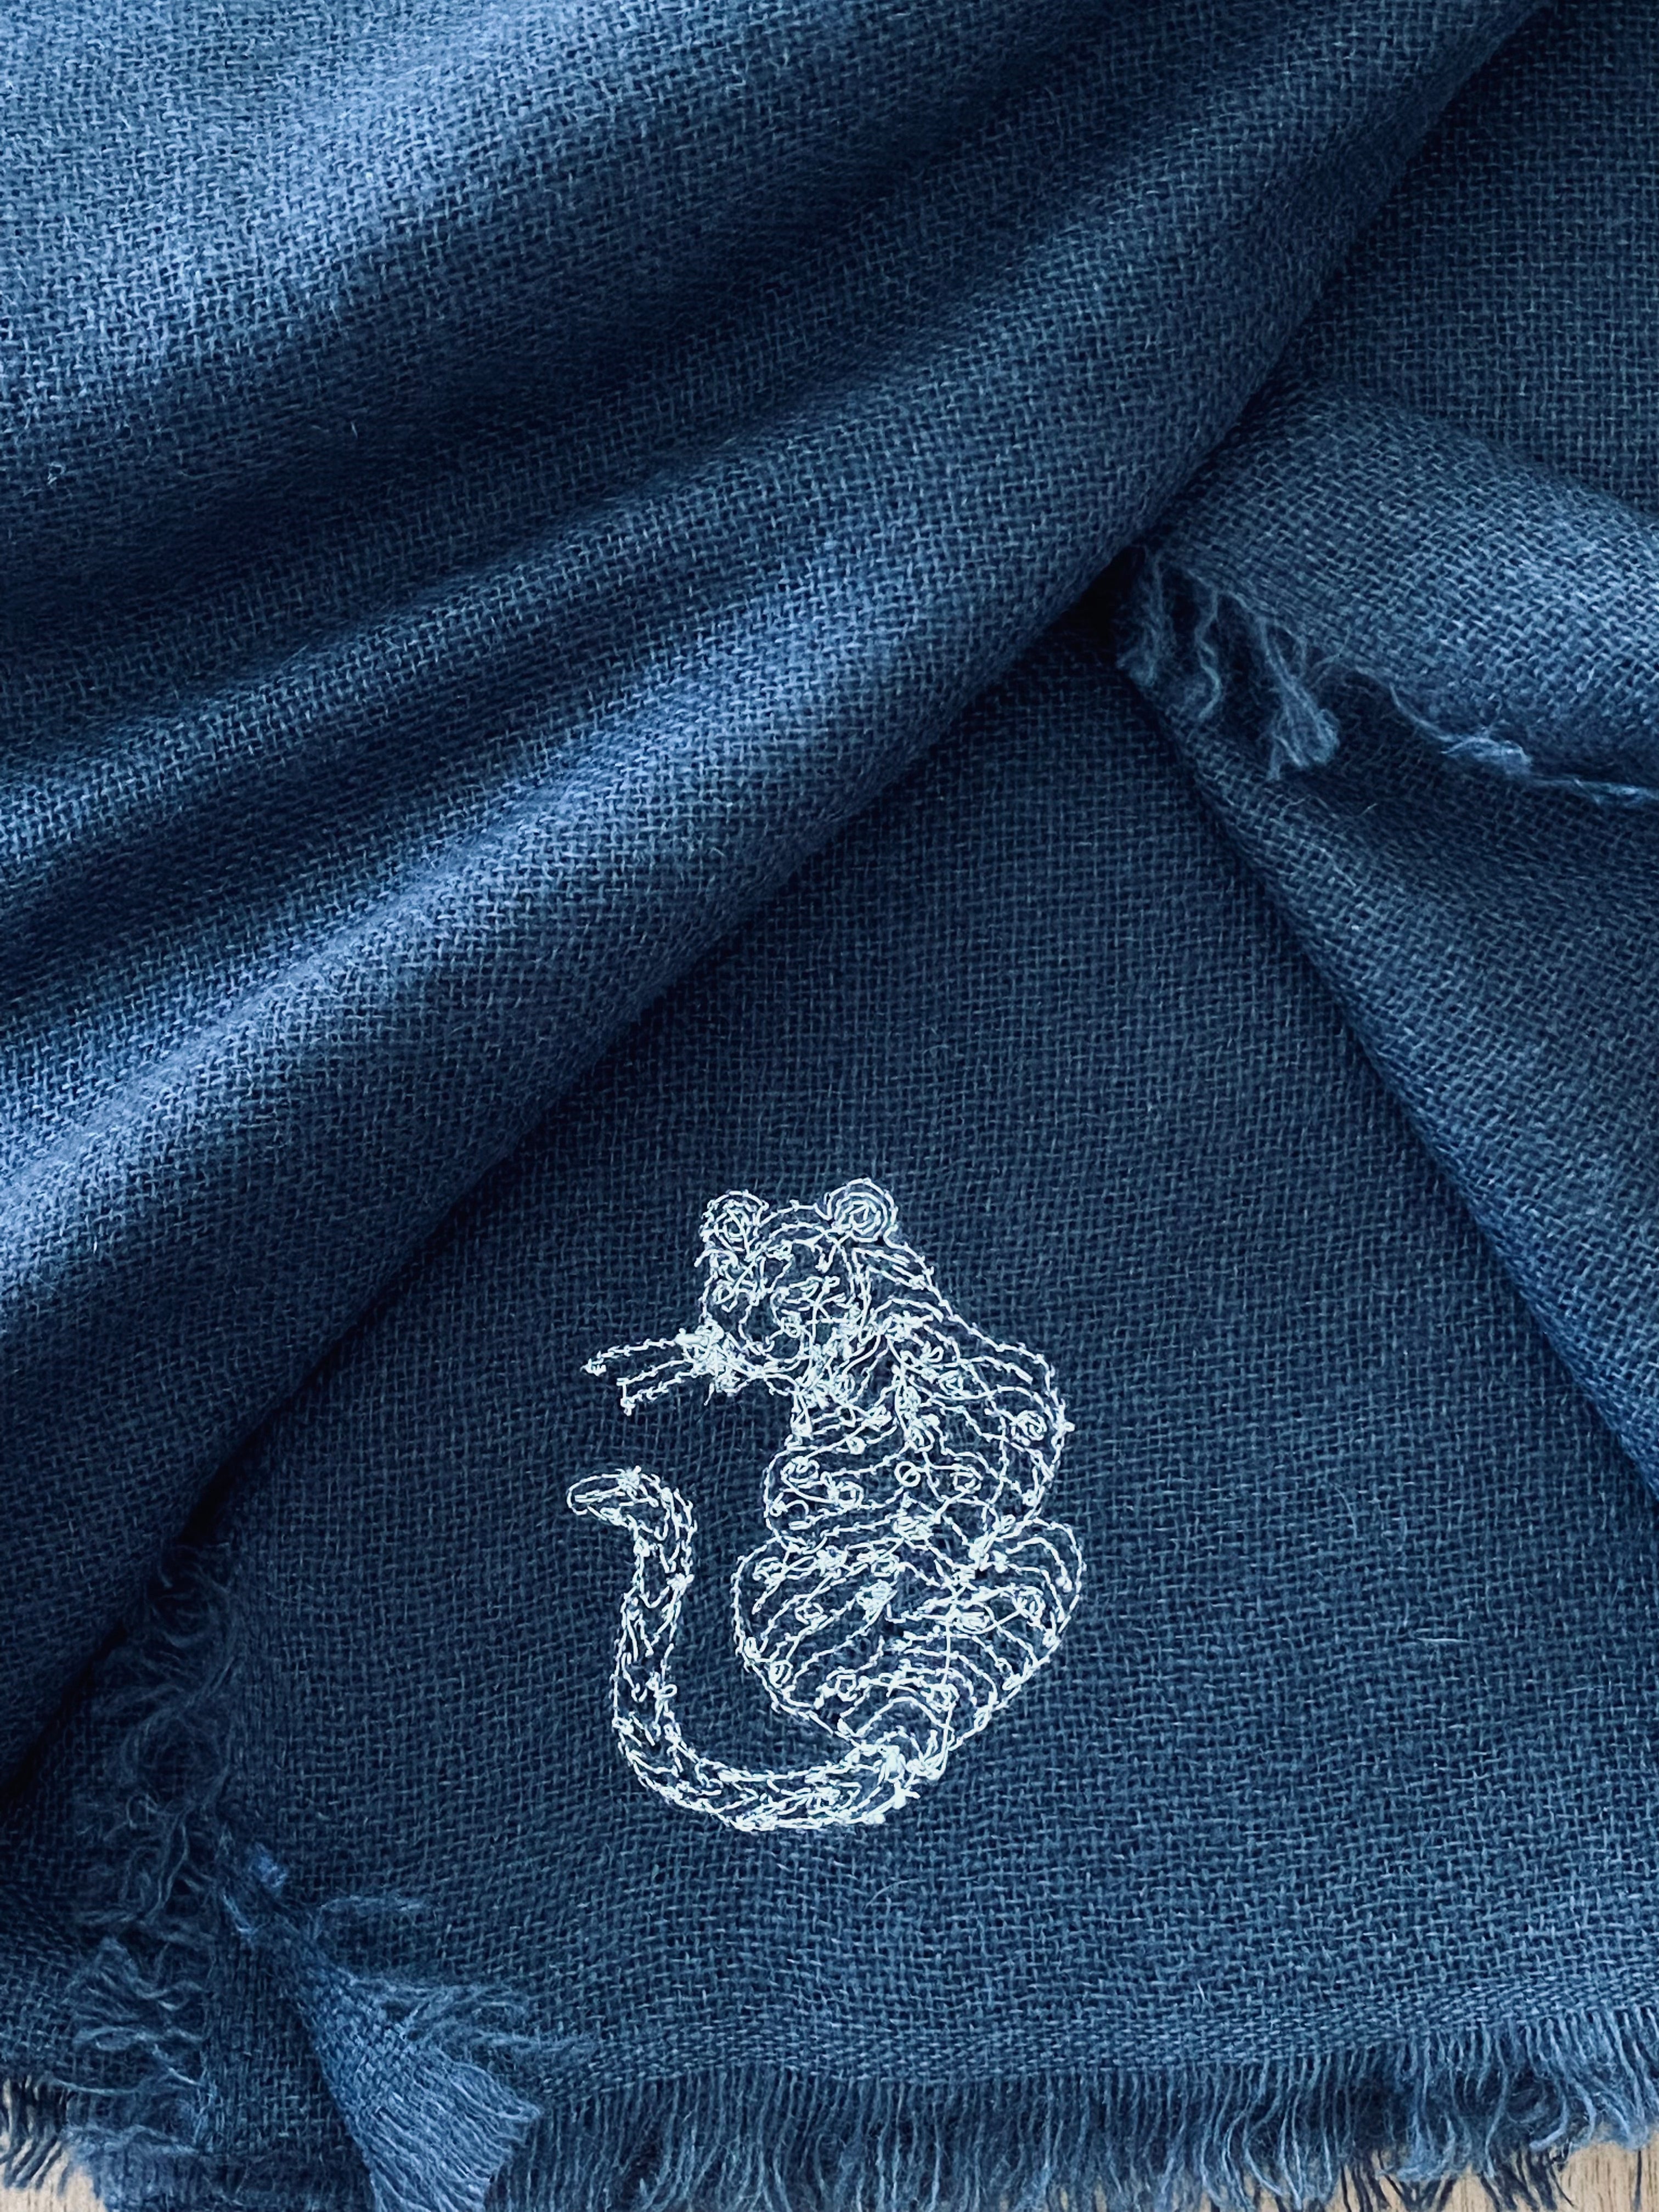 Fibre Tibet limited edition cashmere scarf with embroidered tiger